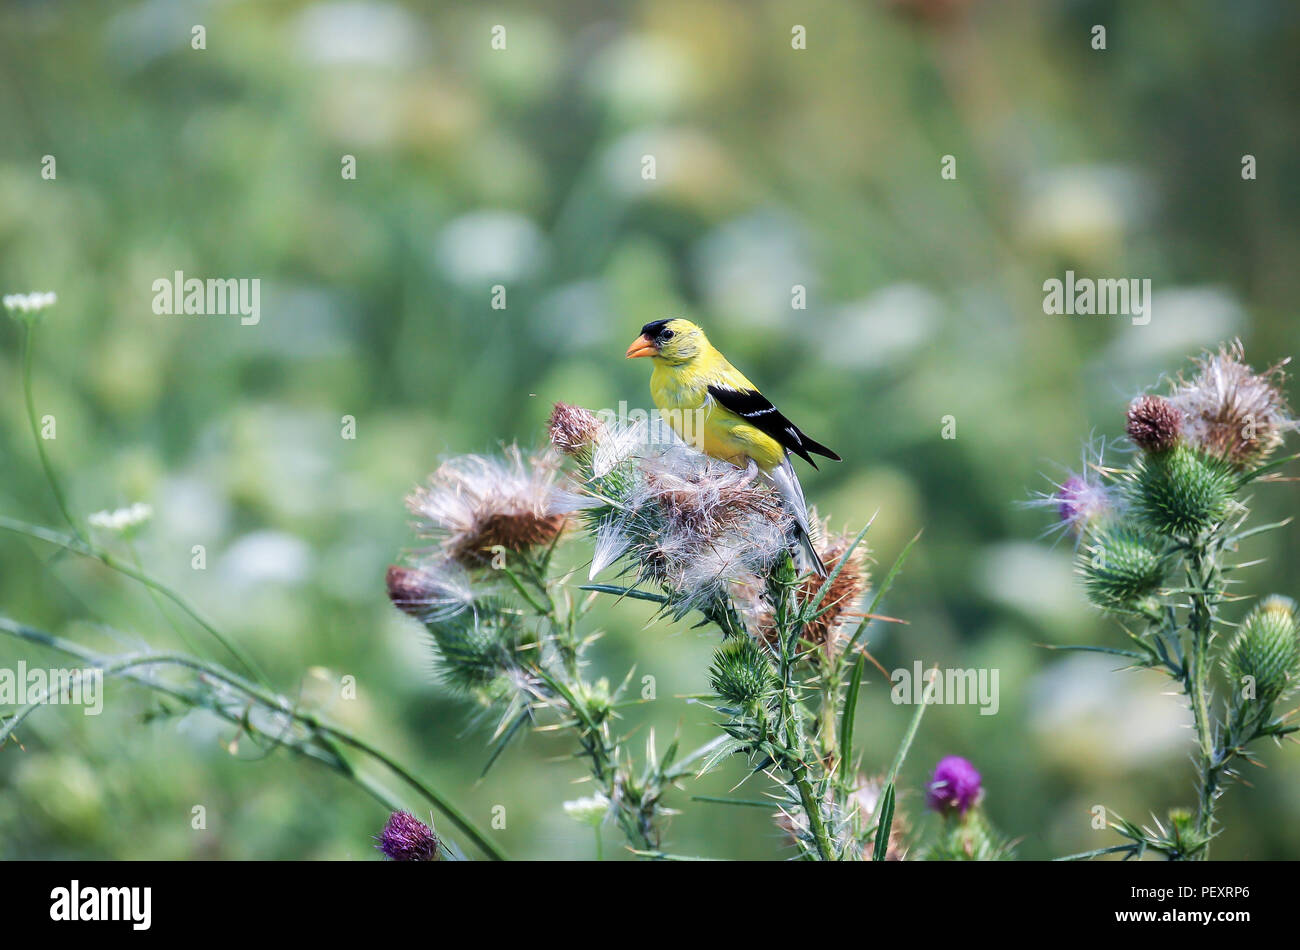 Colorful Bird on colorful flower Stock Photo